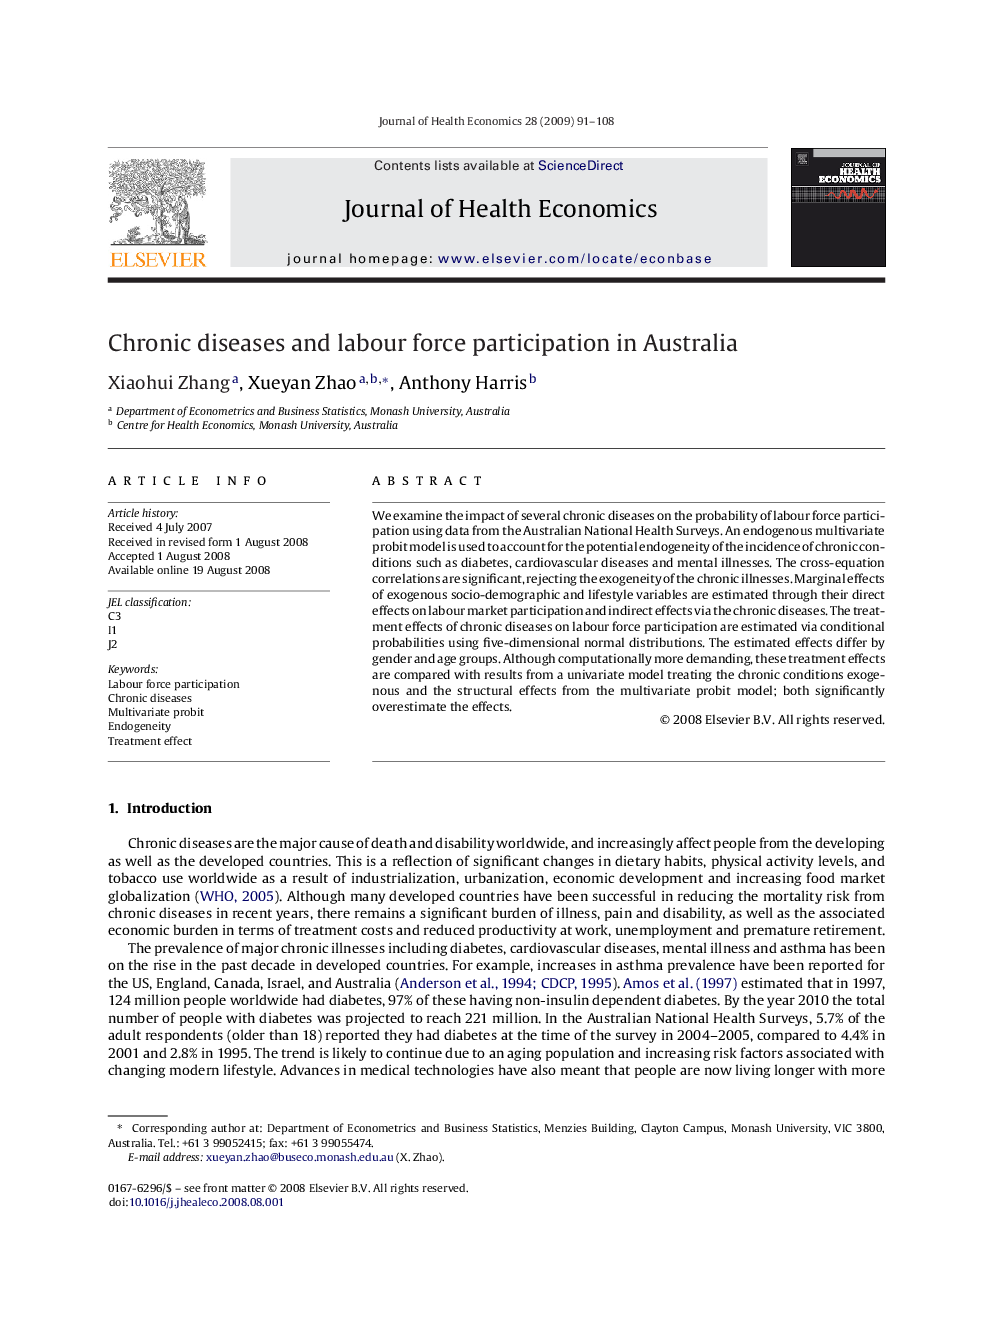 Chronic diseases and labour force participation in Australia